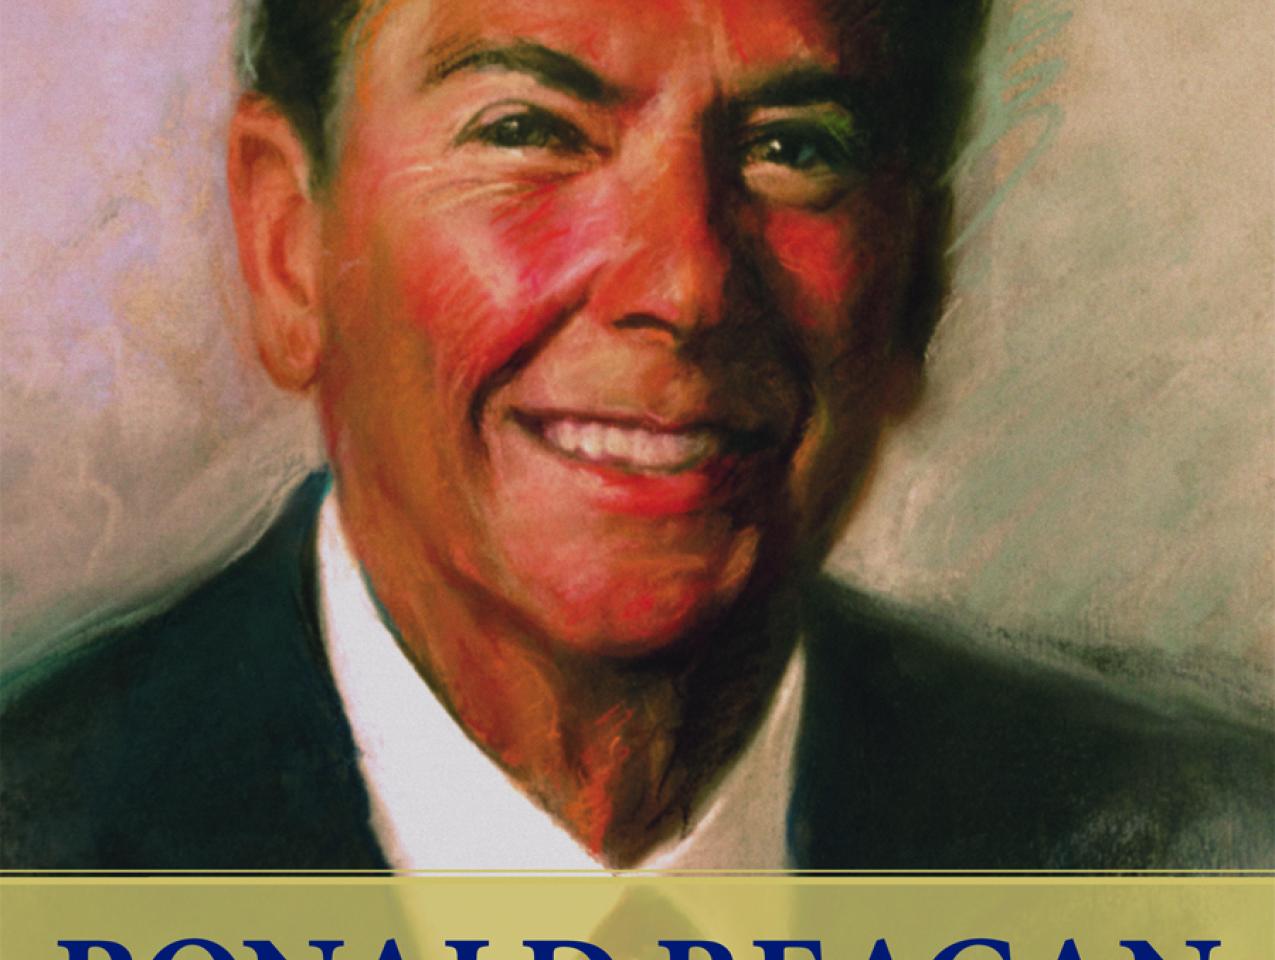 Ronald Reagan: Decisions of Greatness, the latest work of Martin and Annelise Anderson